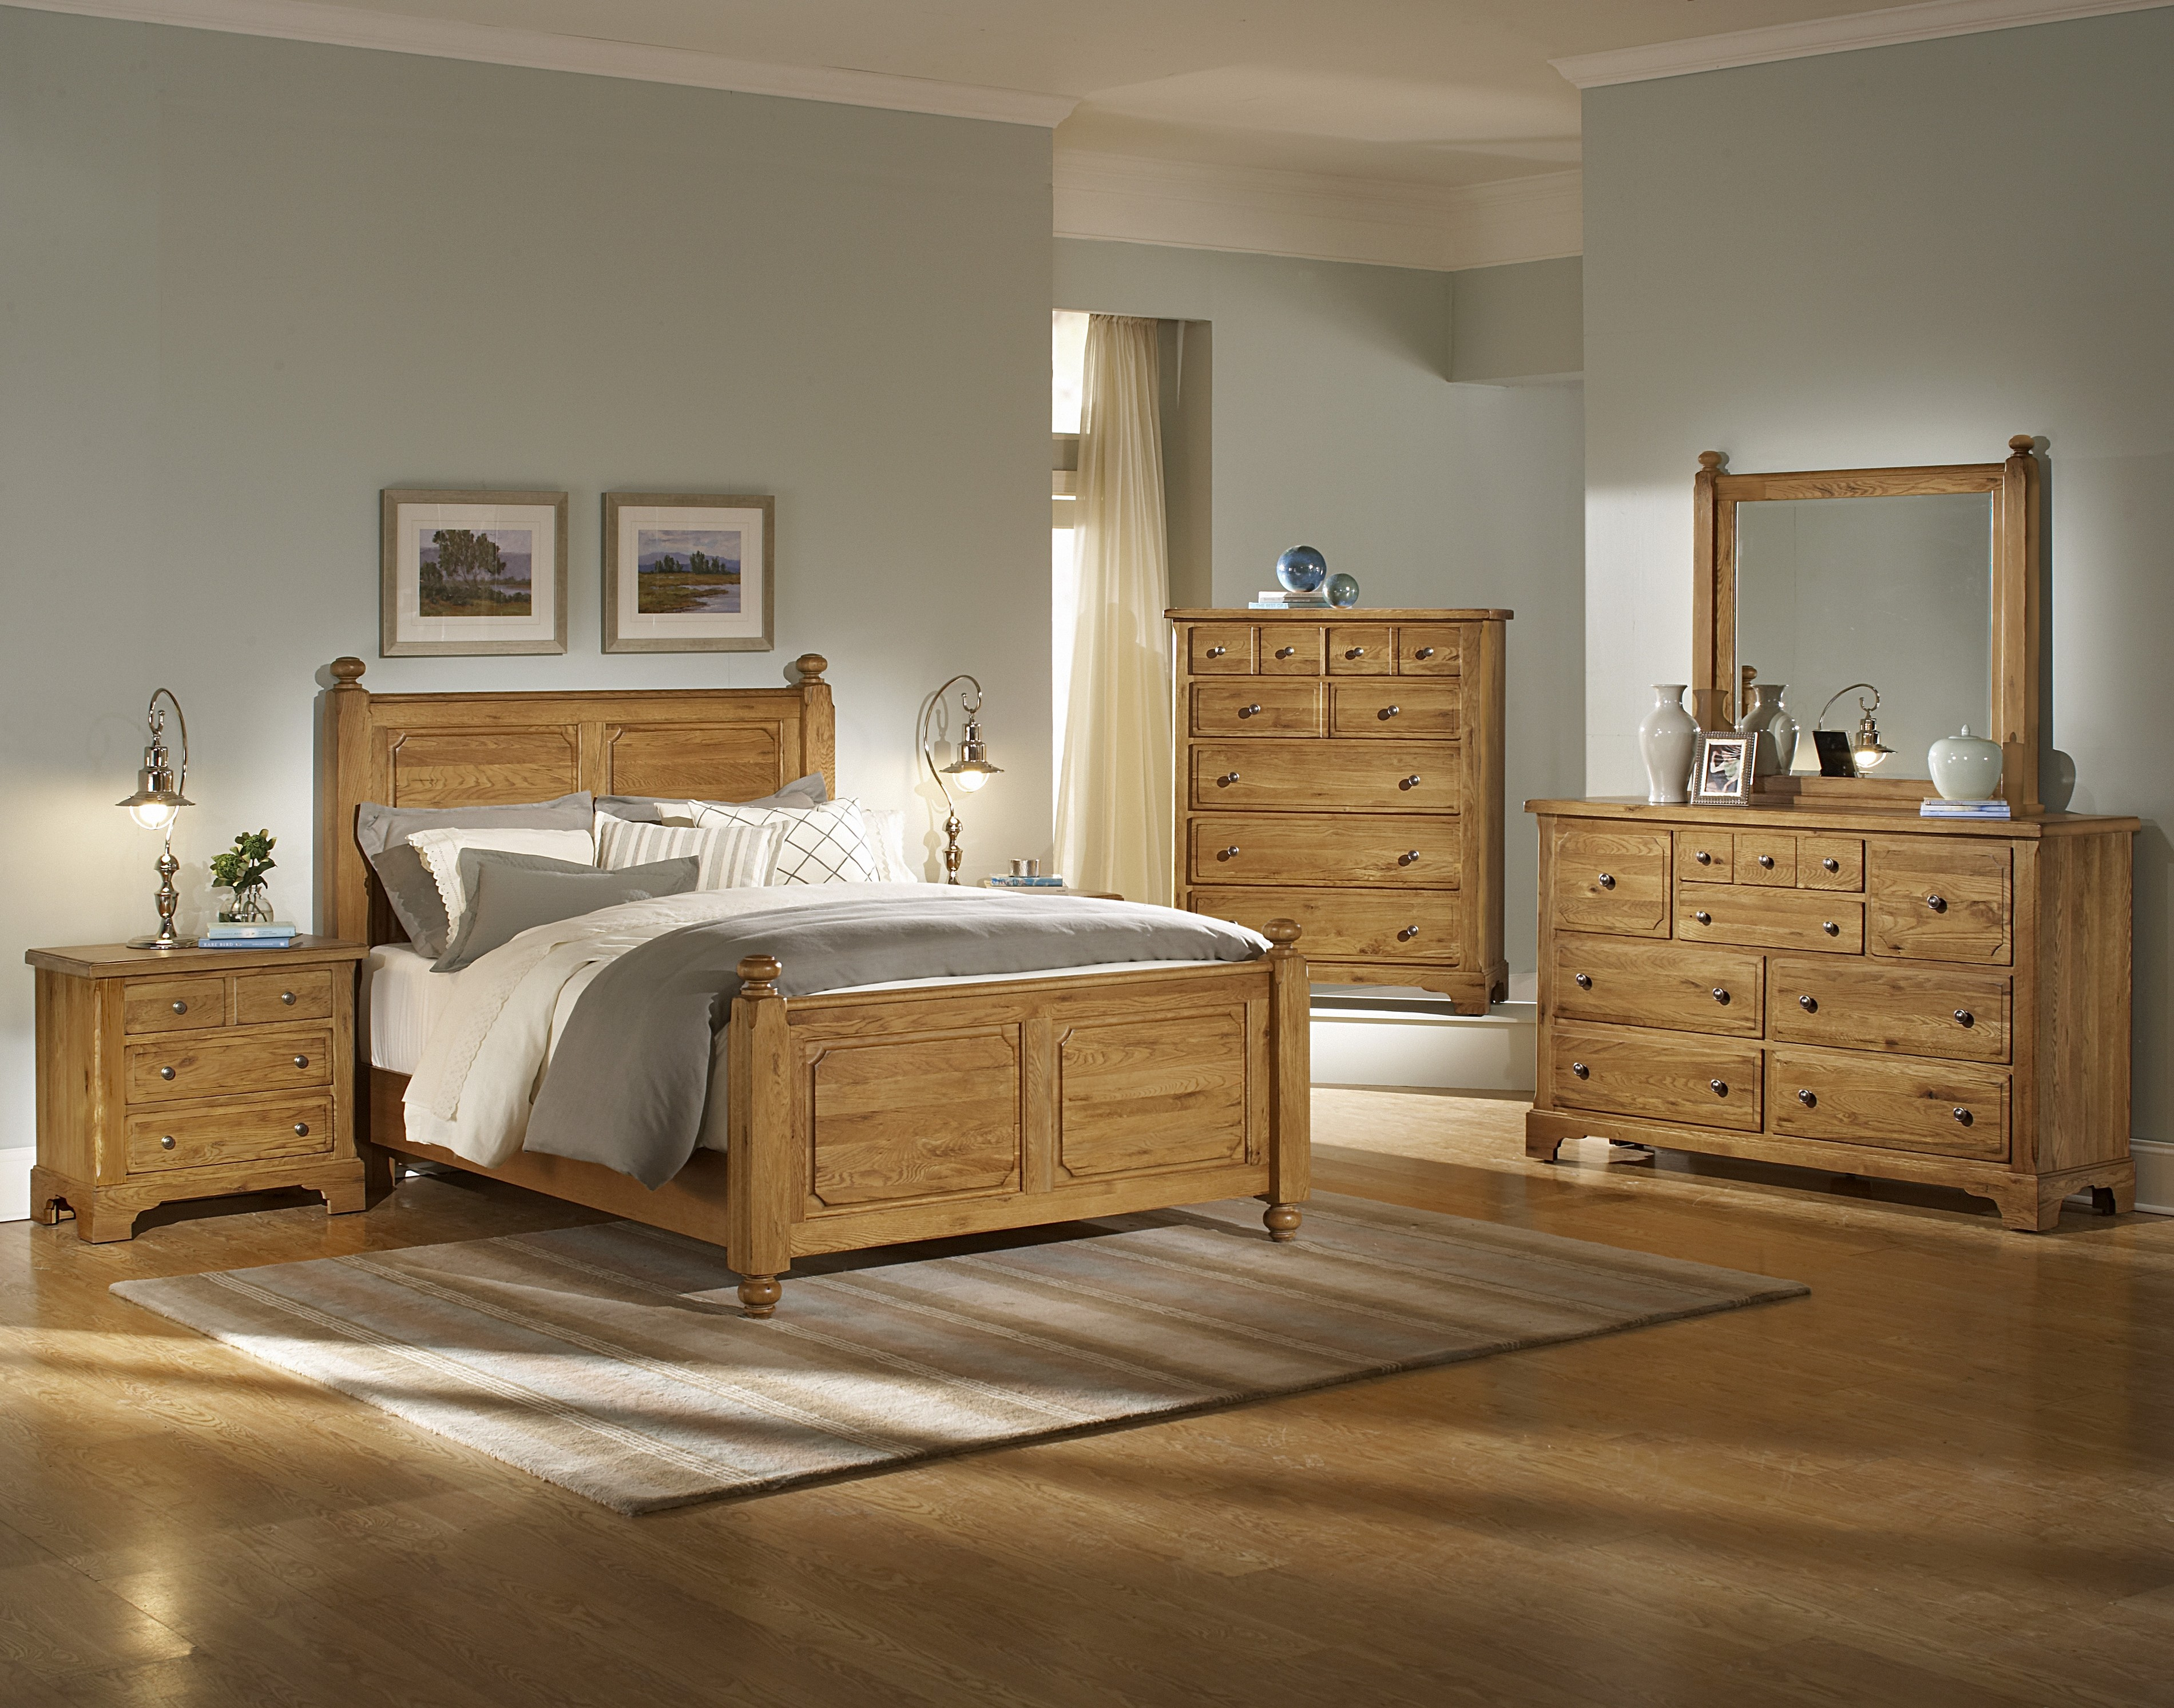 Light Colored Wood Bedroom Furniture Eo Furniture within proportions 3800 X 2986